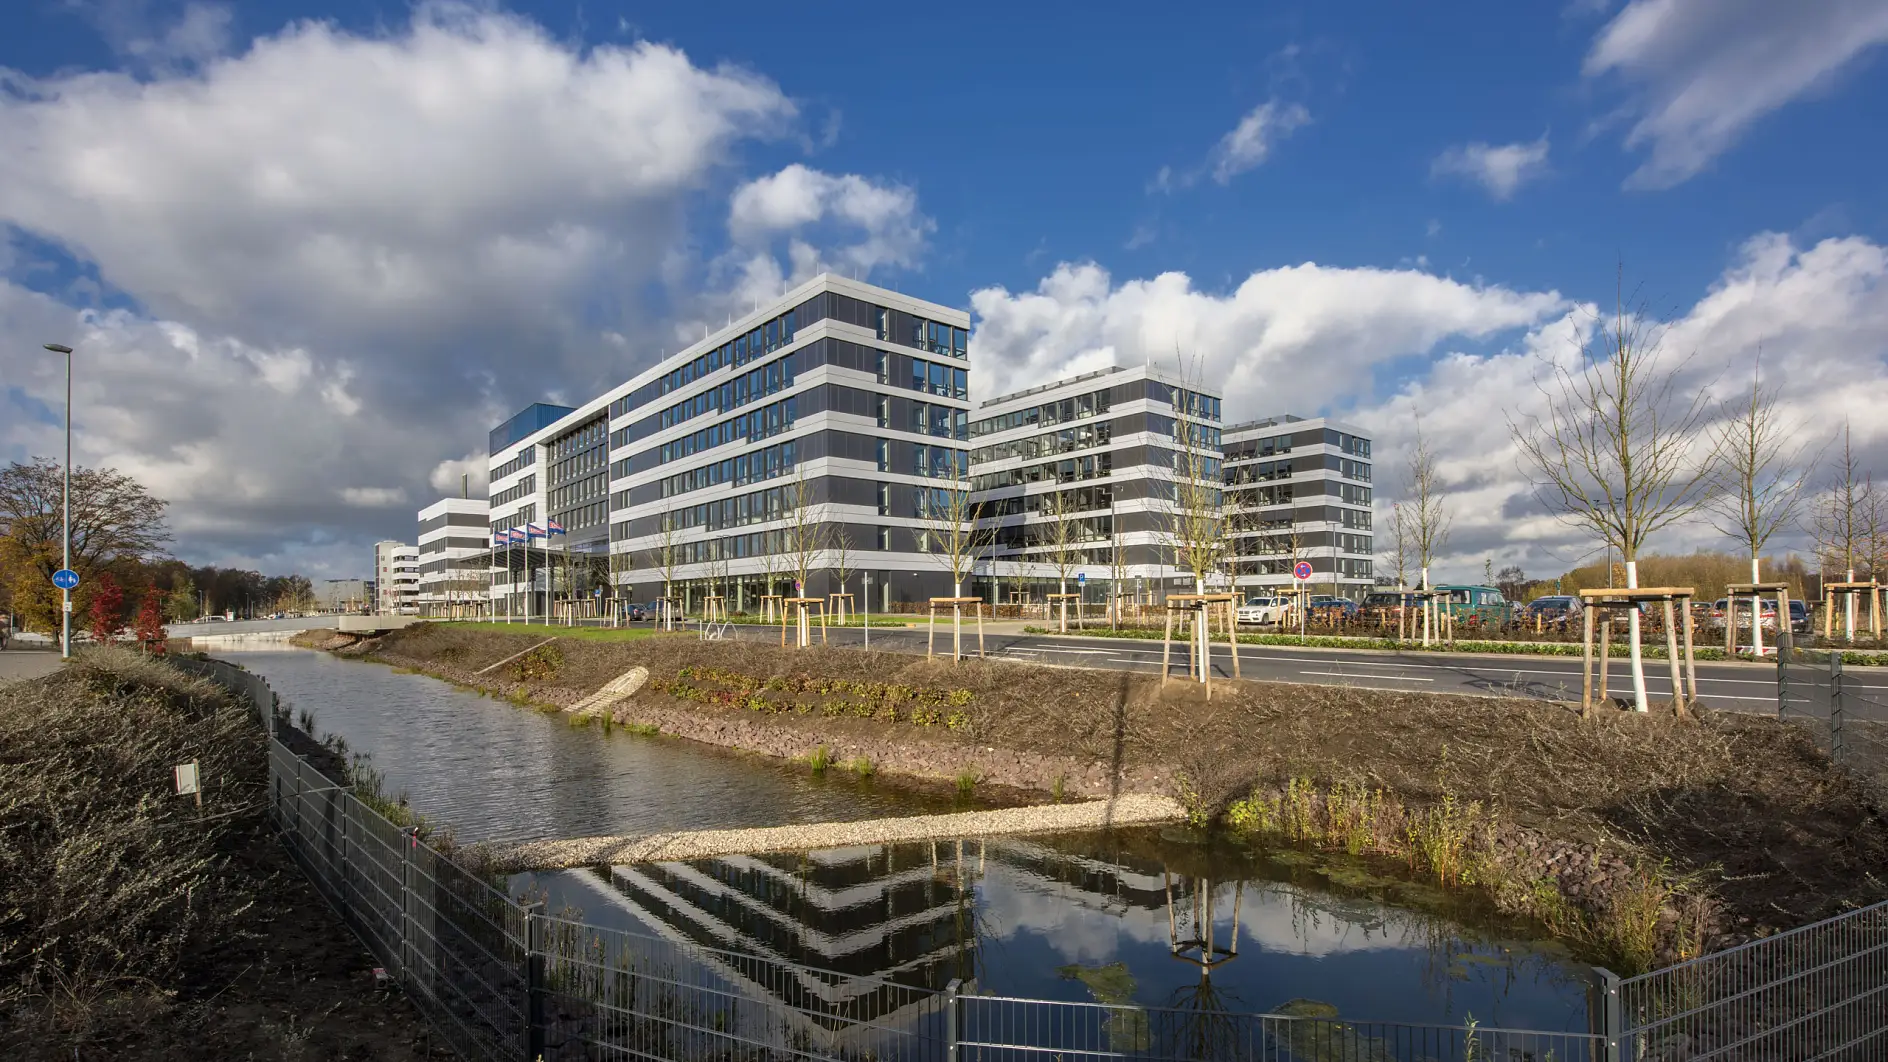 The new Headquarters of tesa SE in Norderstedt / Germany